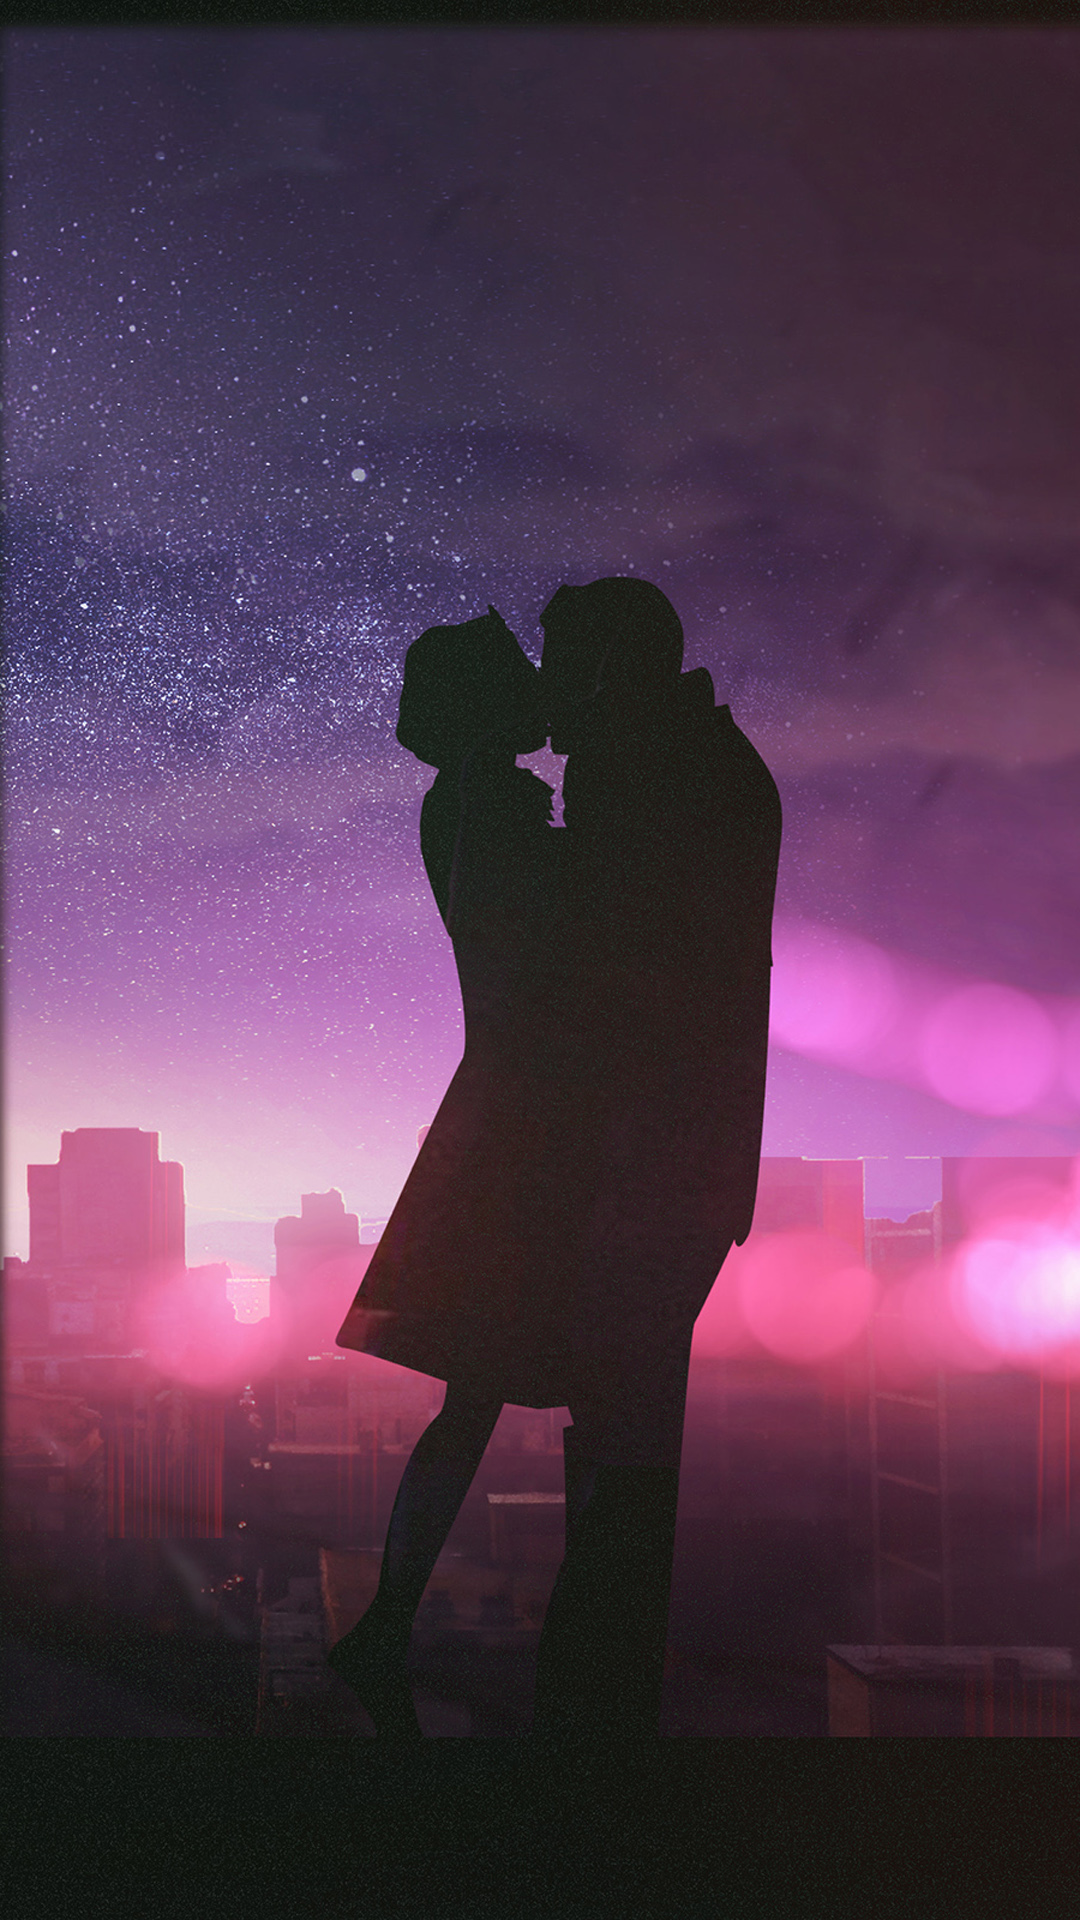 Couples Wallpaper Hd For Mobile - 1080x1920 Wallpaper 